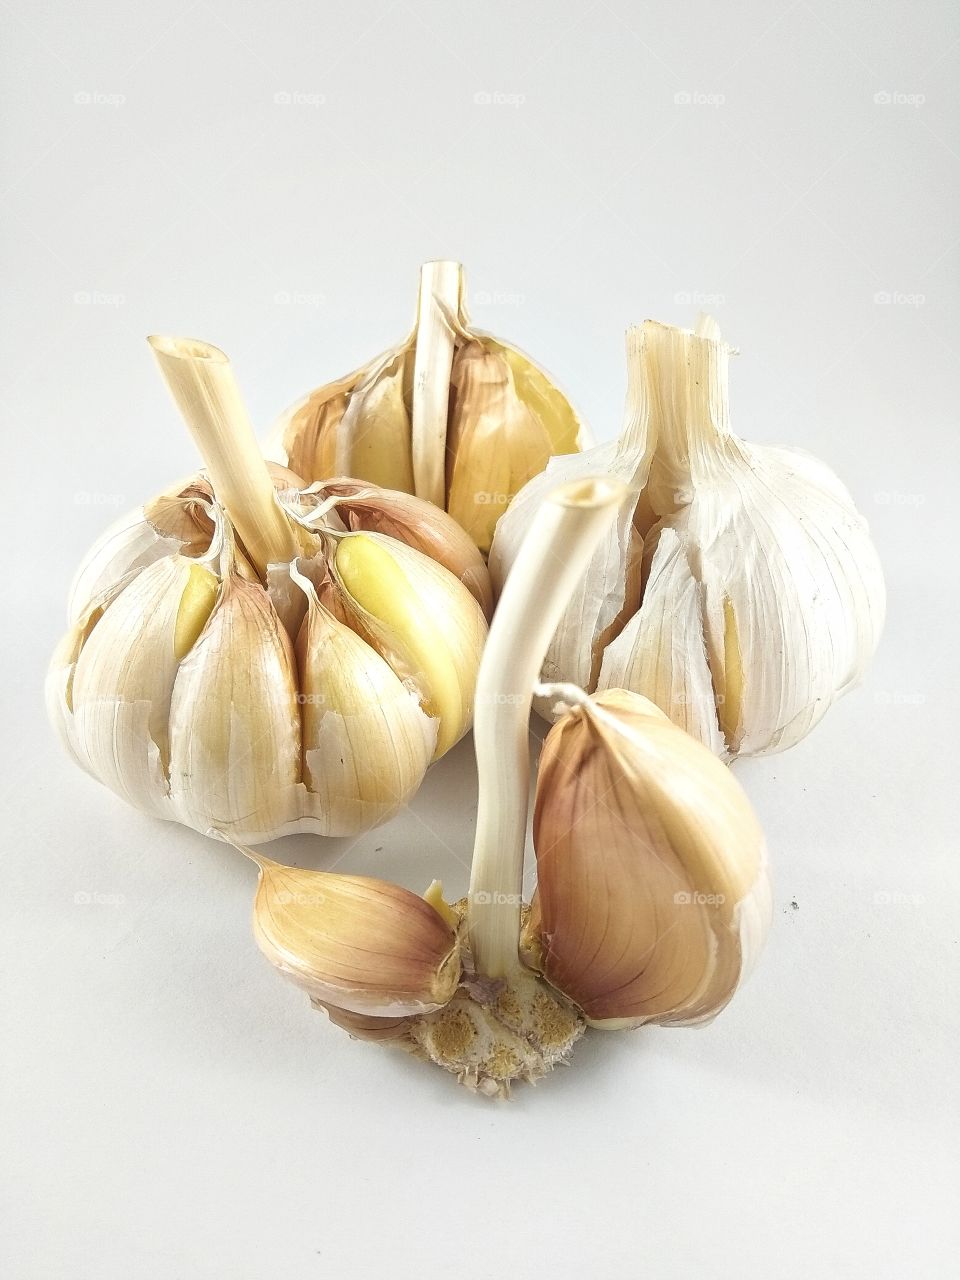 garlic that gives a delicious aroma to the food and good for the health of the body